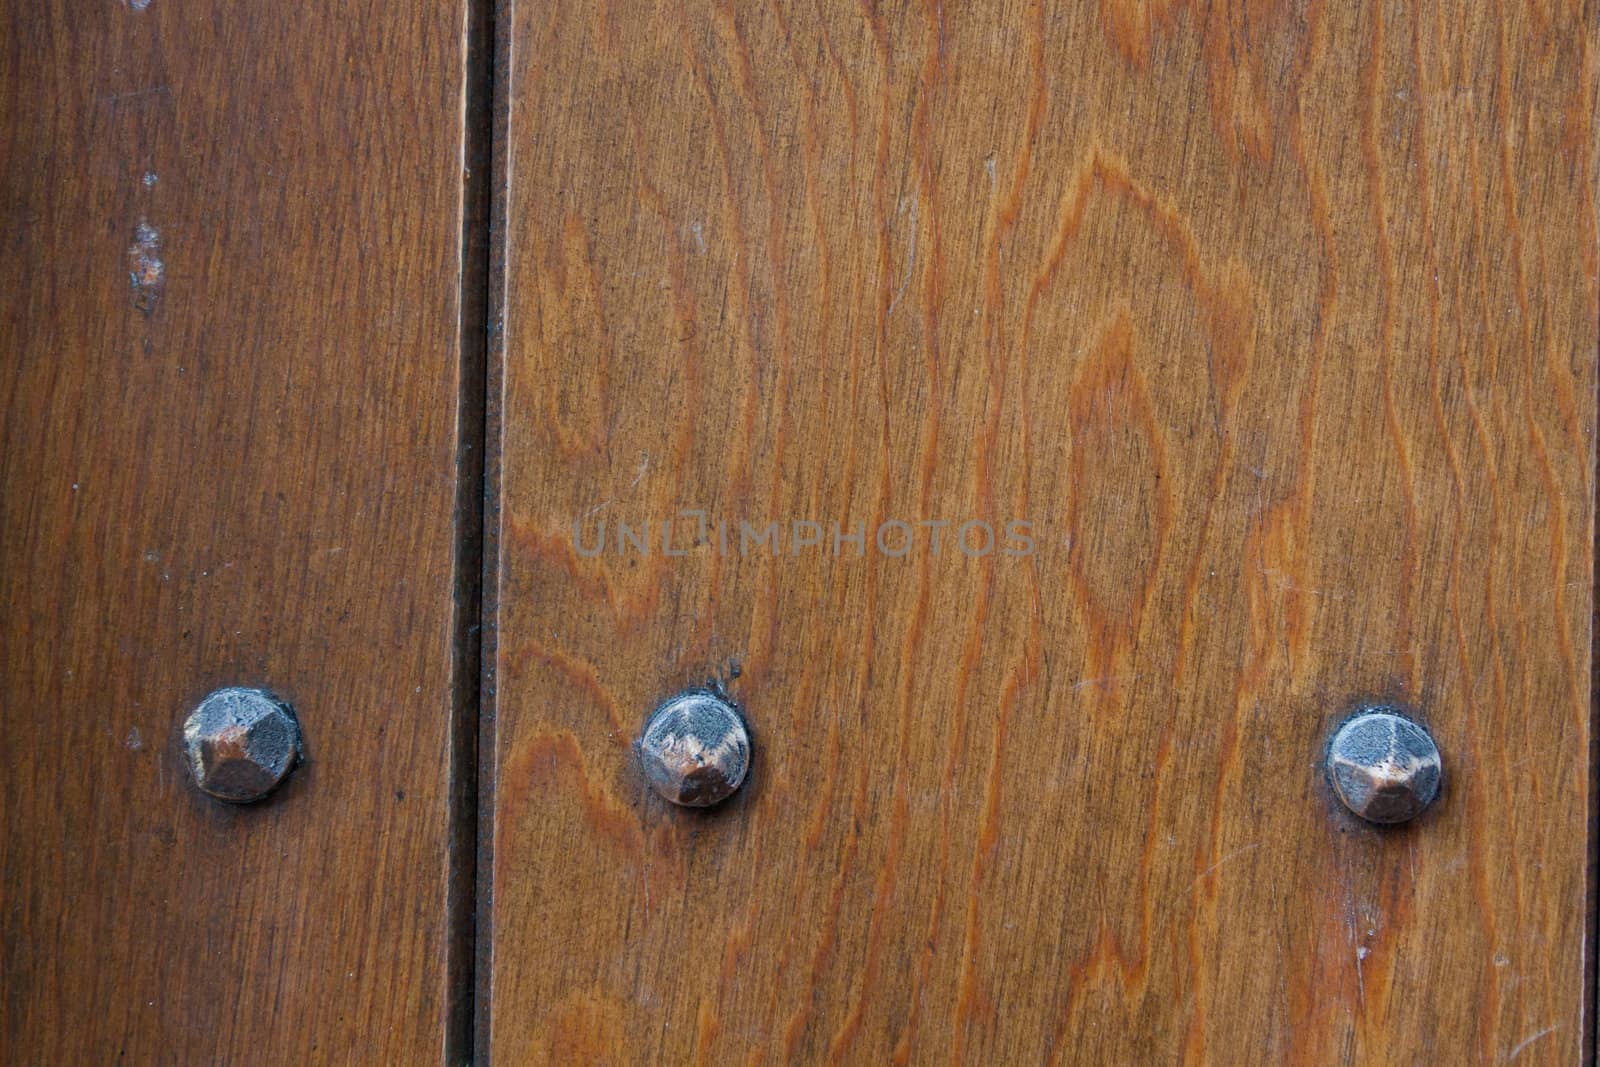 Metal Hardware and Wood by joshuaraineyphotography